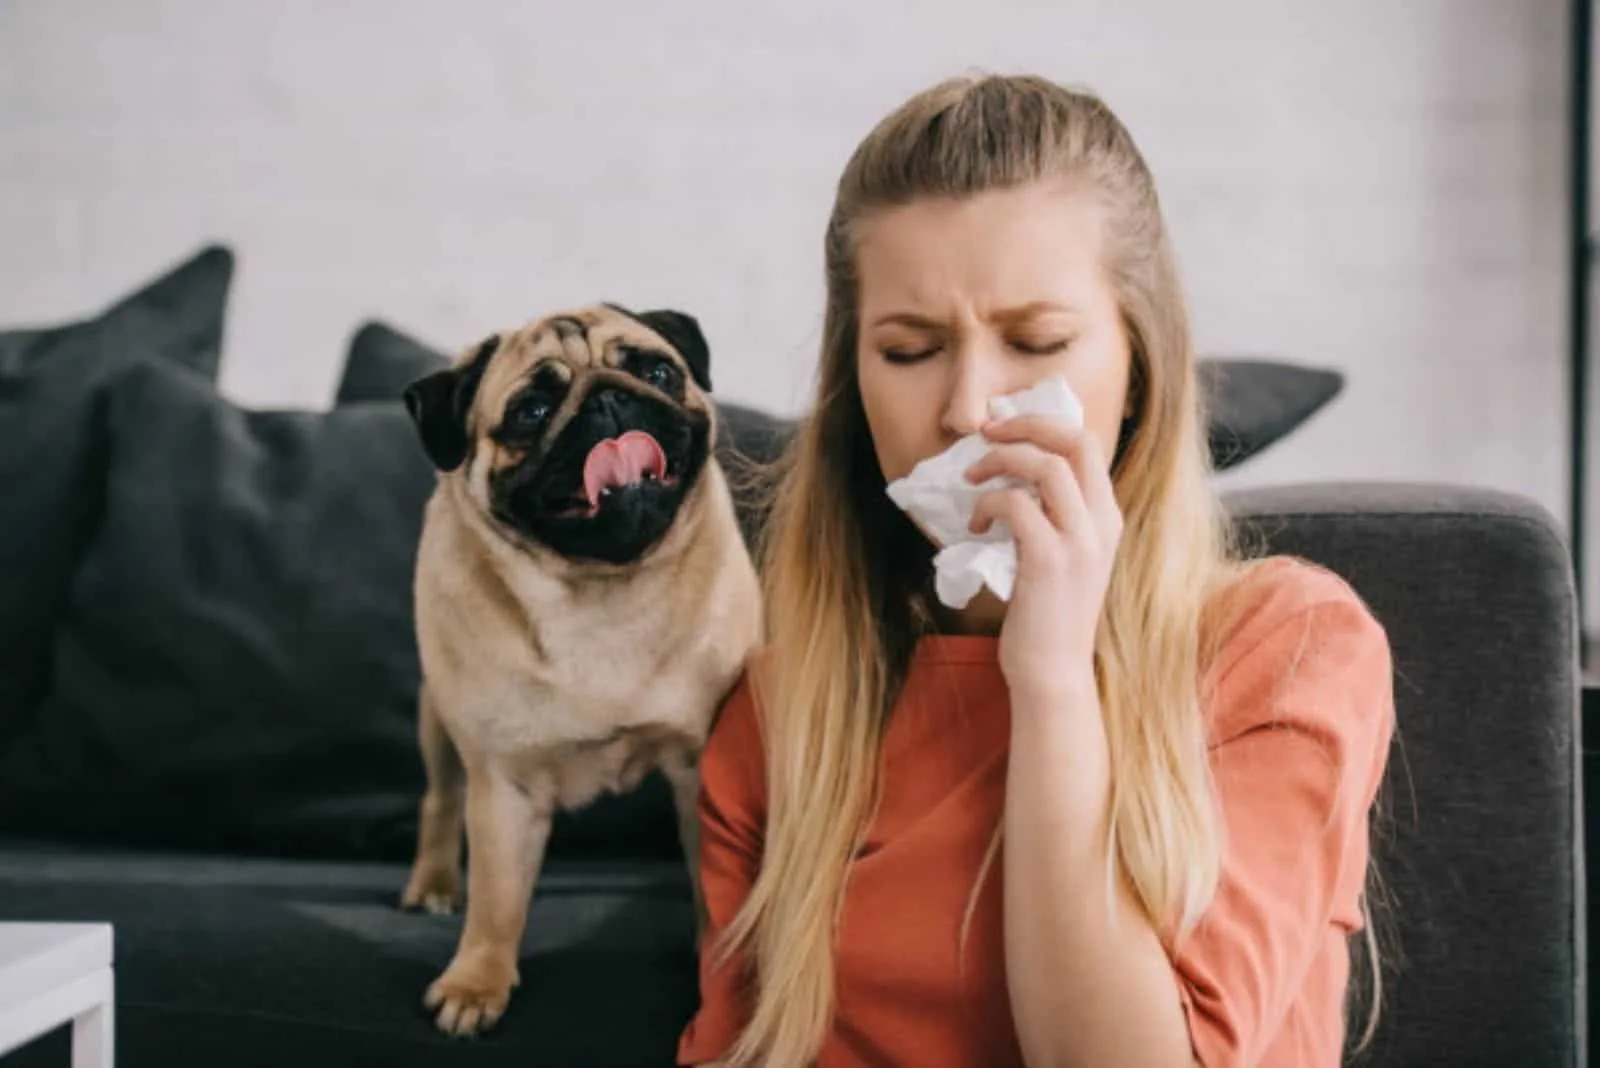 Sneezing woman next to the dog